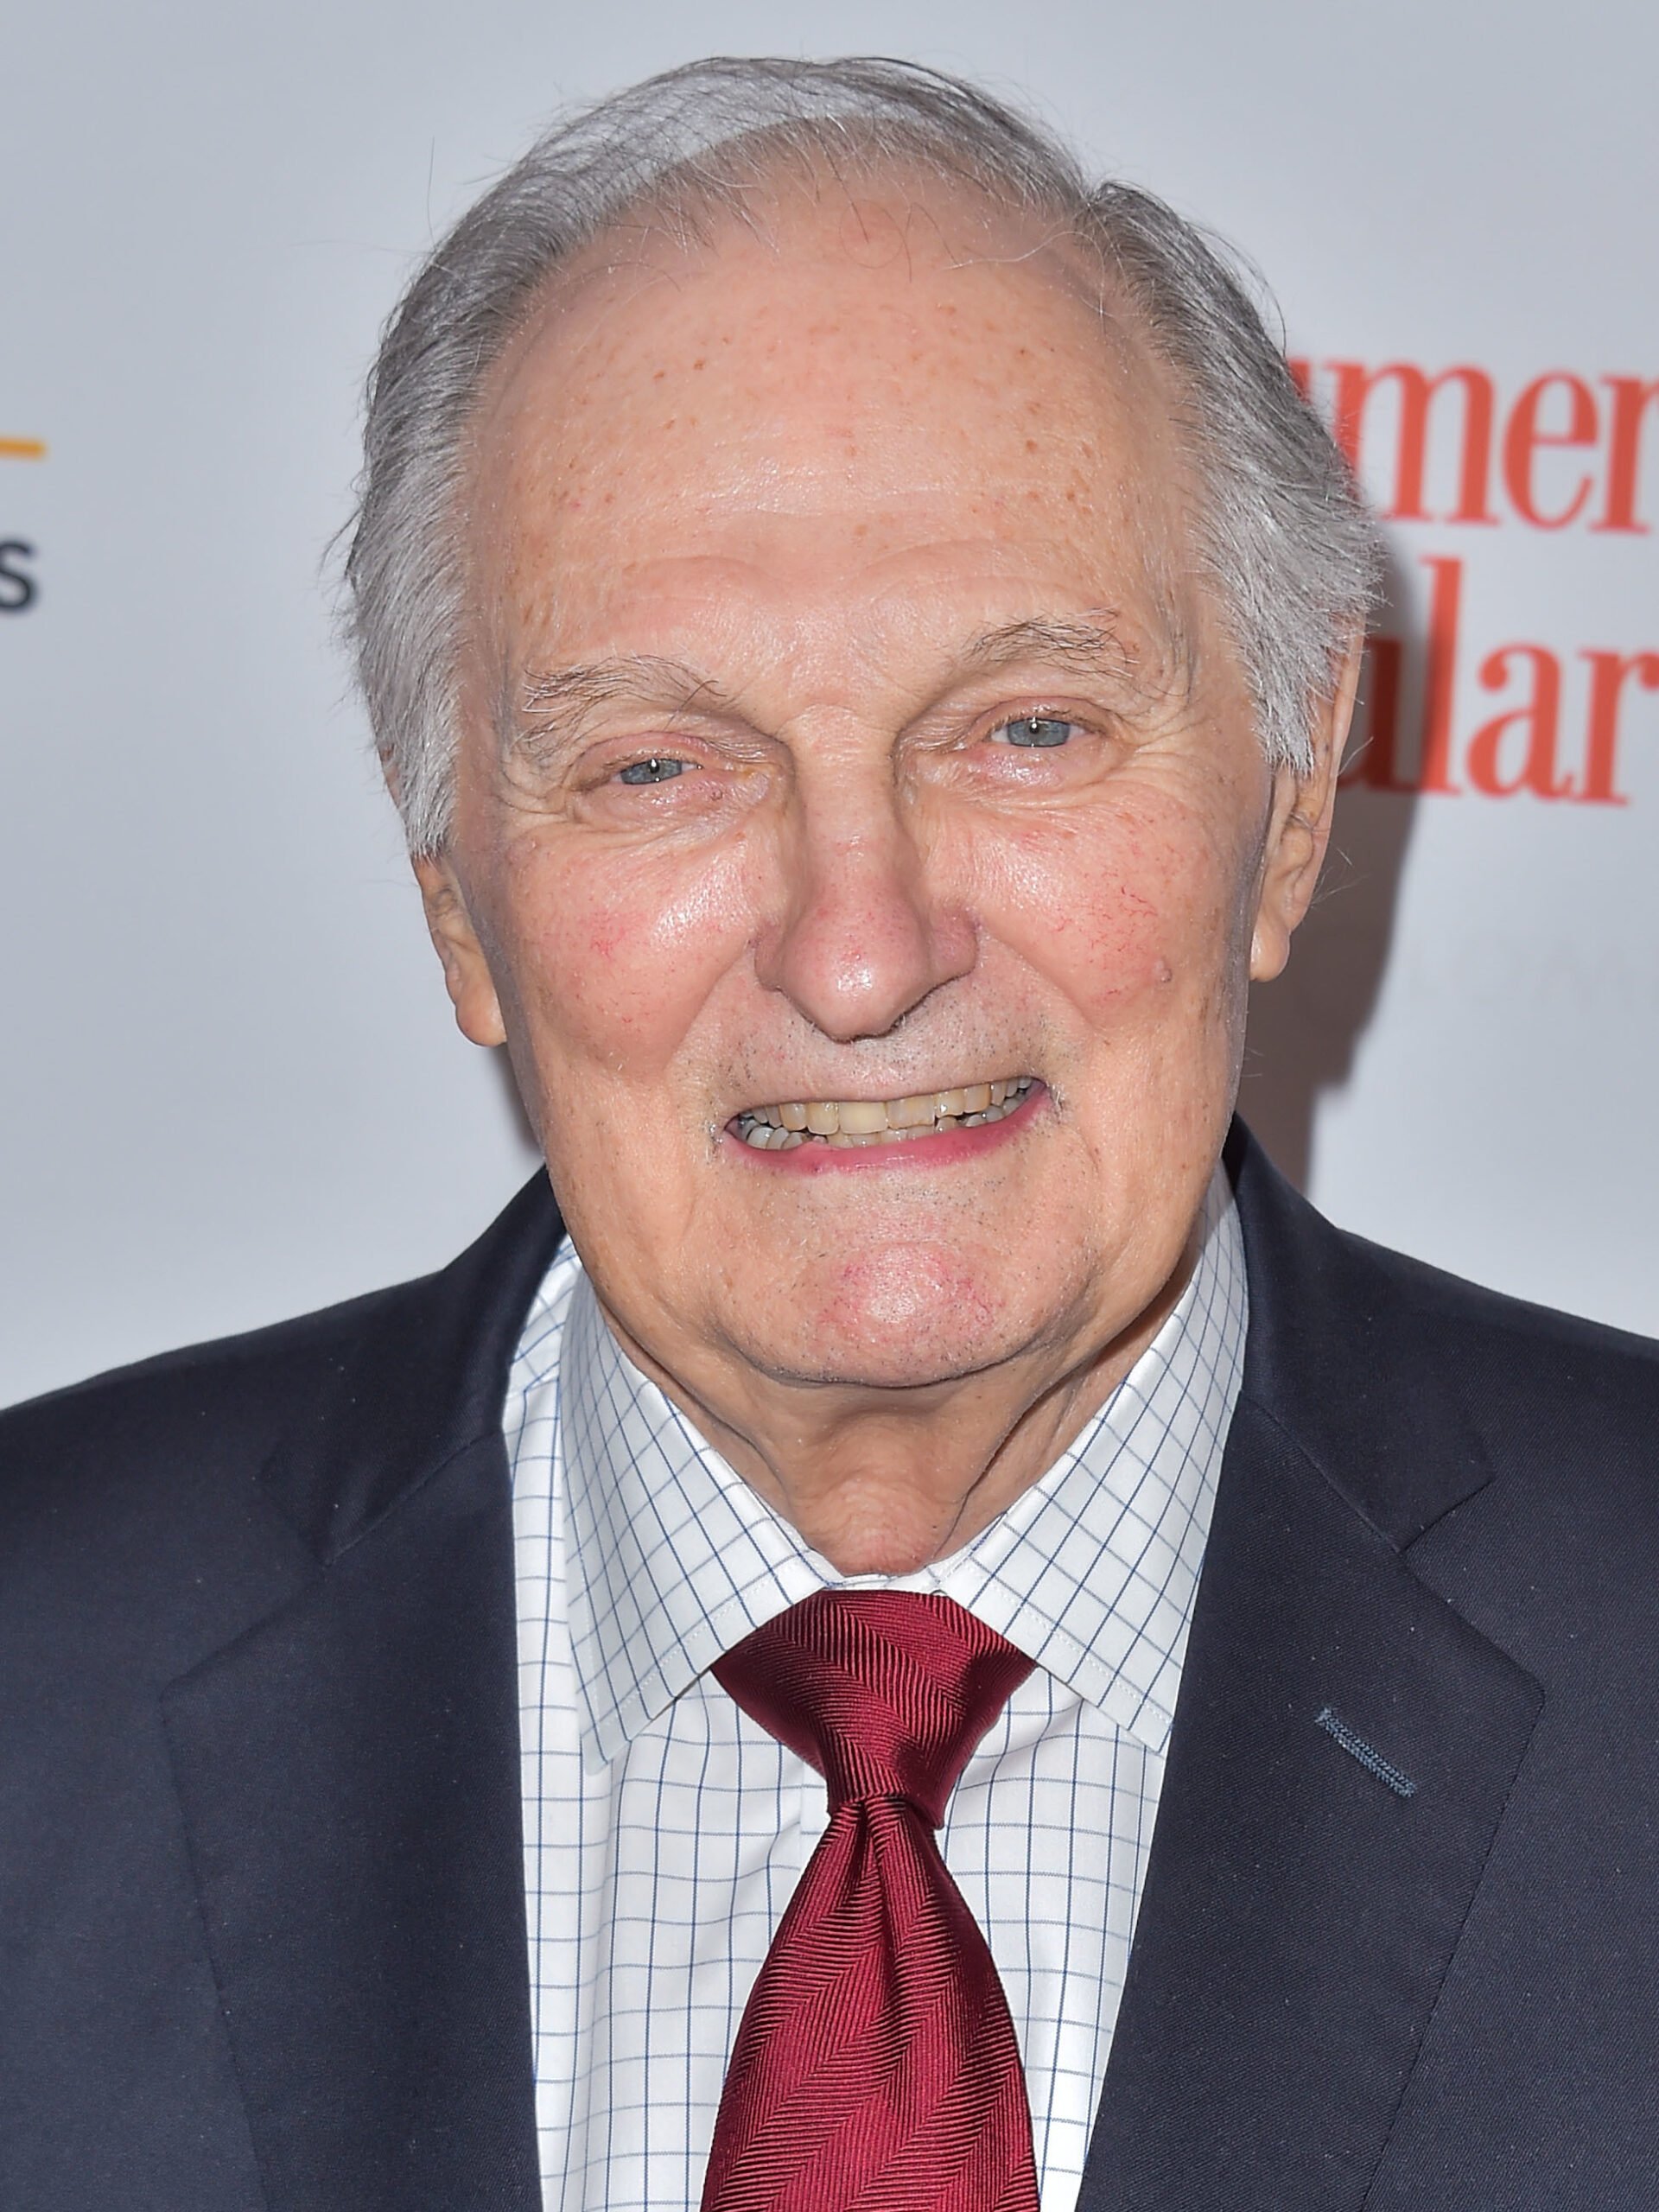 Whatever Happened To Alan Alda, Hawkeye Pierce From 'M*A*S*H?'